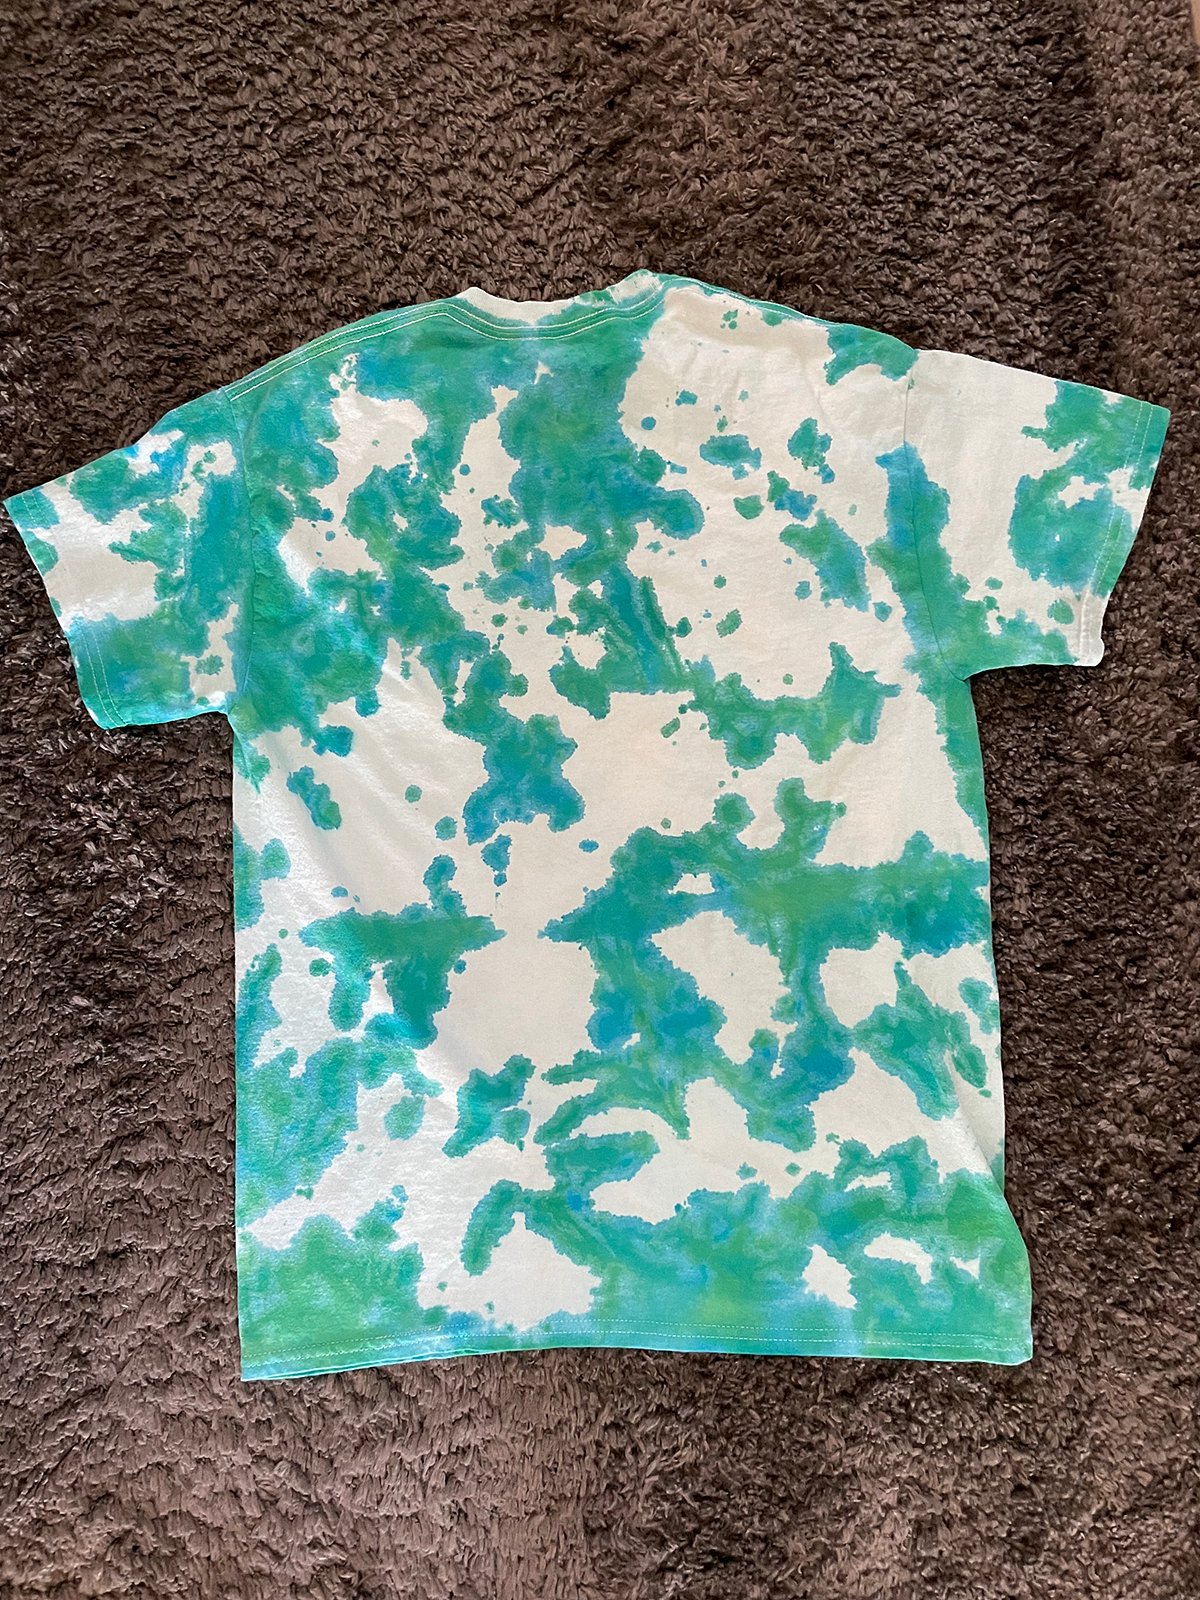 Completed crumple tie dye t shirt 